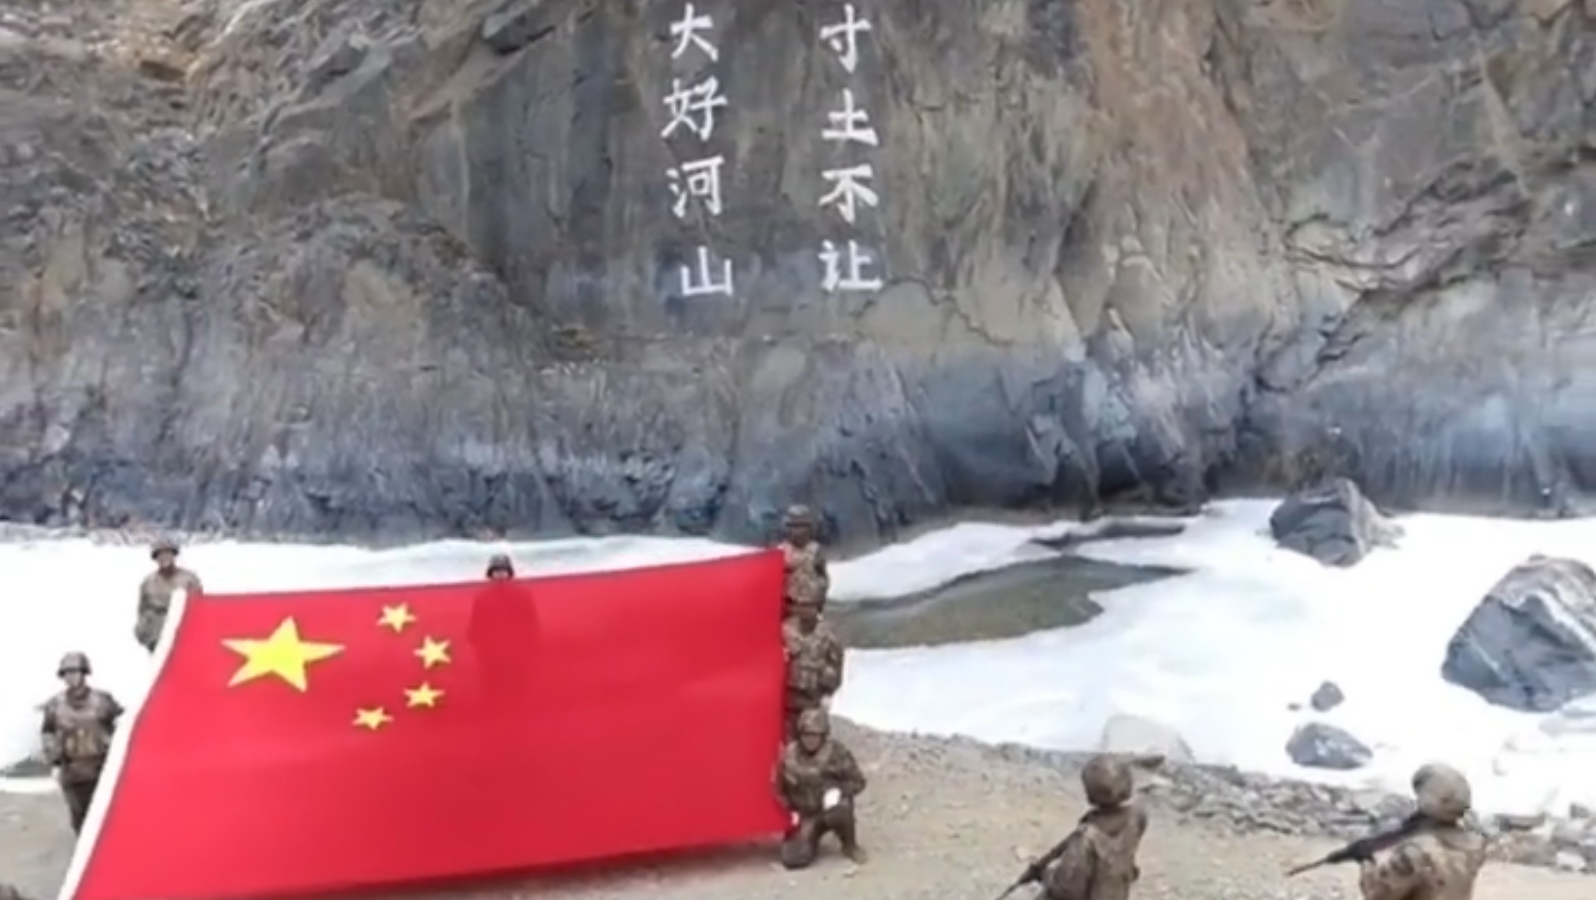 Double Check : Did the PLA Hoist the Chinese flag in Galwan Valley?